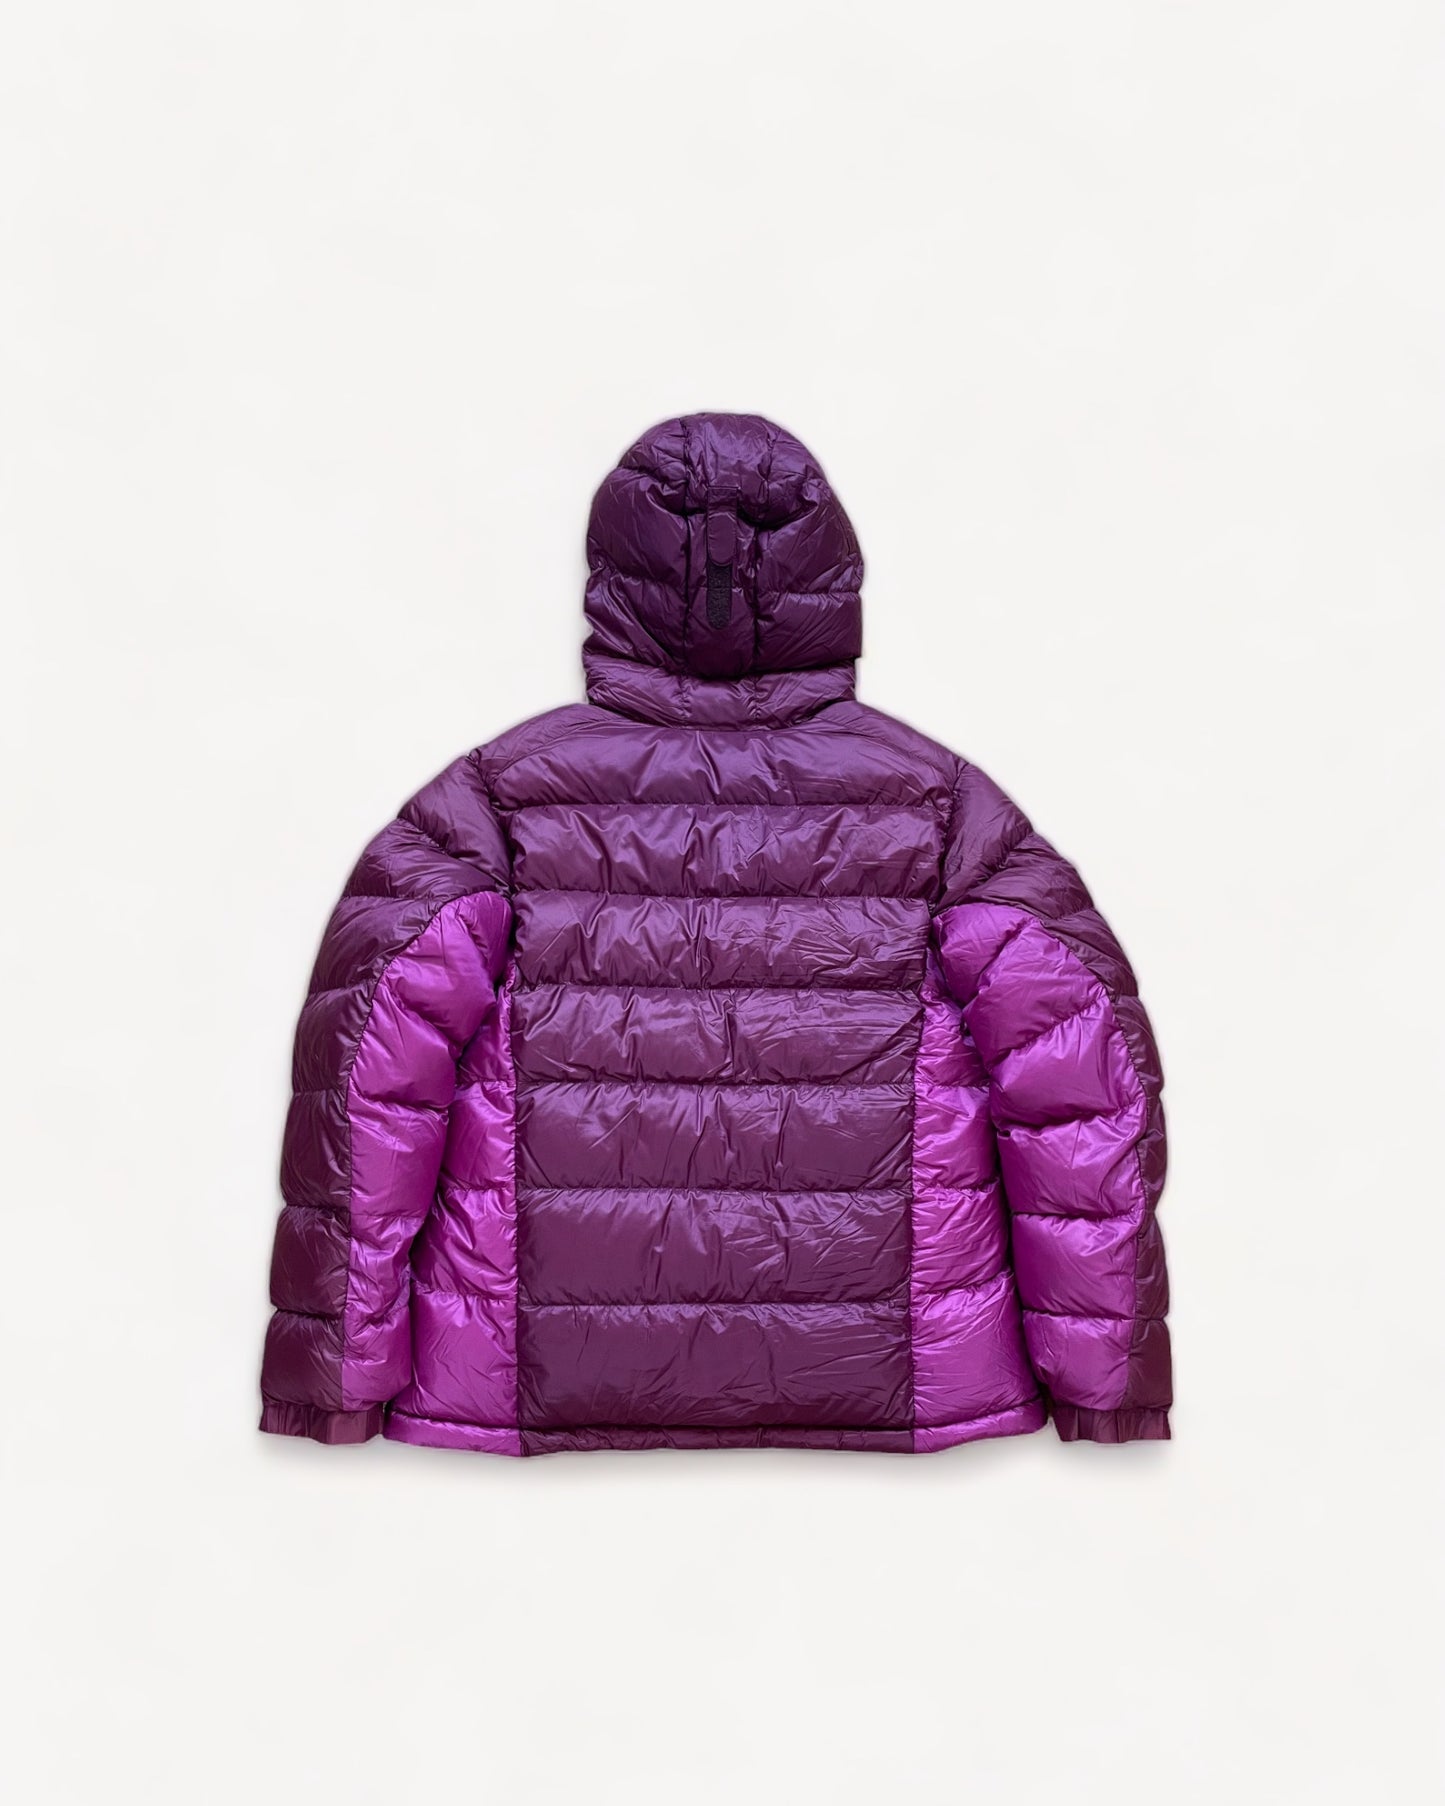 MONTBELL PURPLE PUFFER JACKET (M)